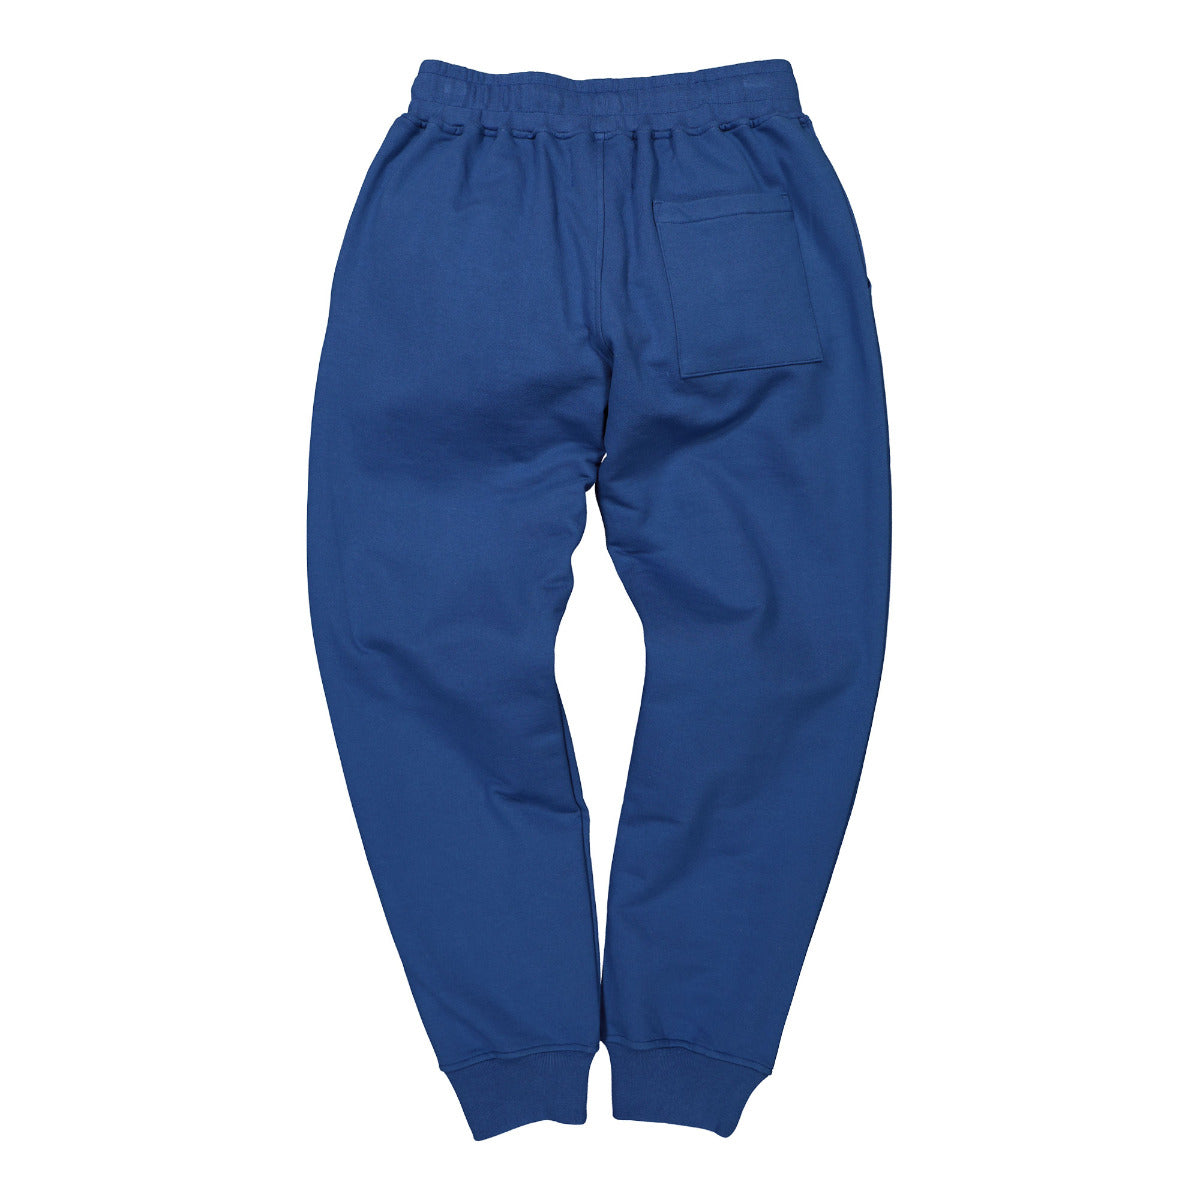 Tennis Club Island Emboidered Pant